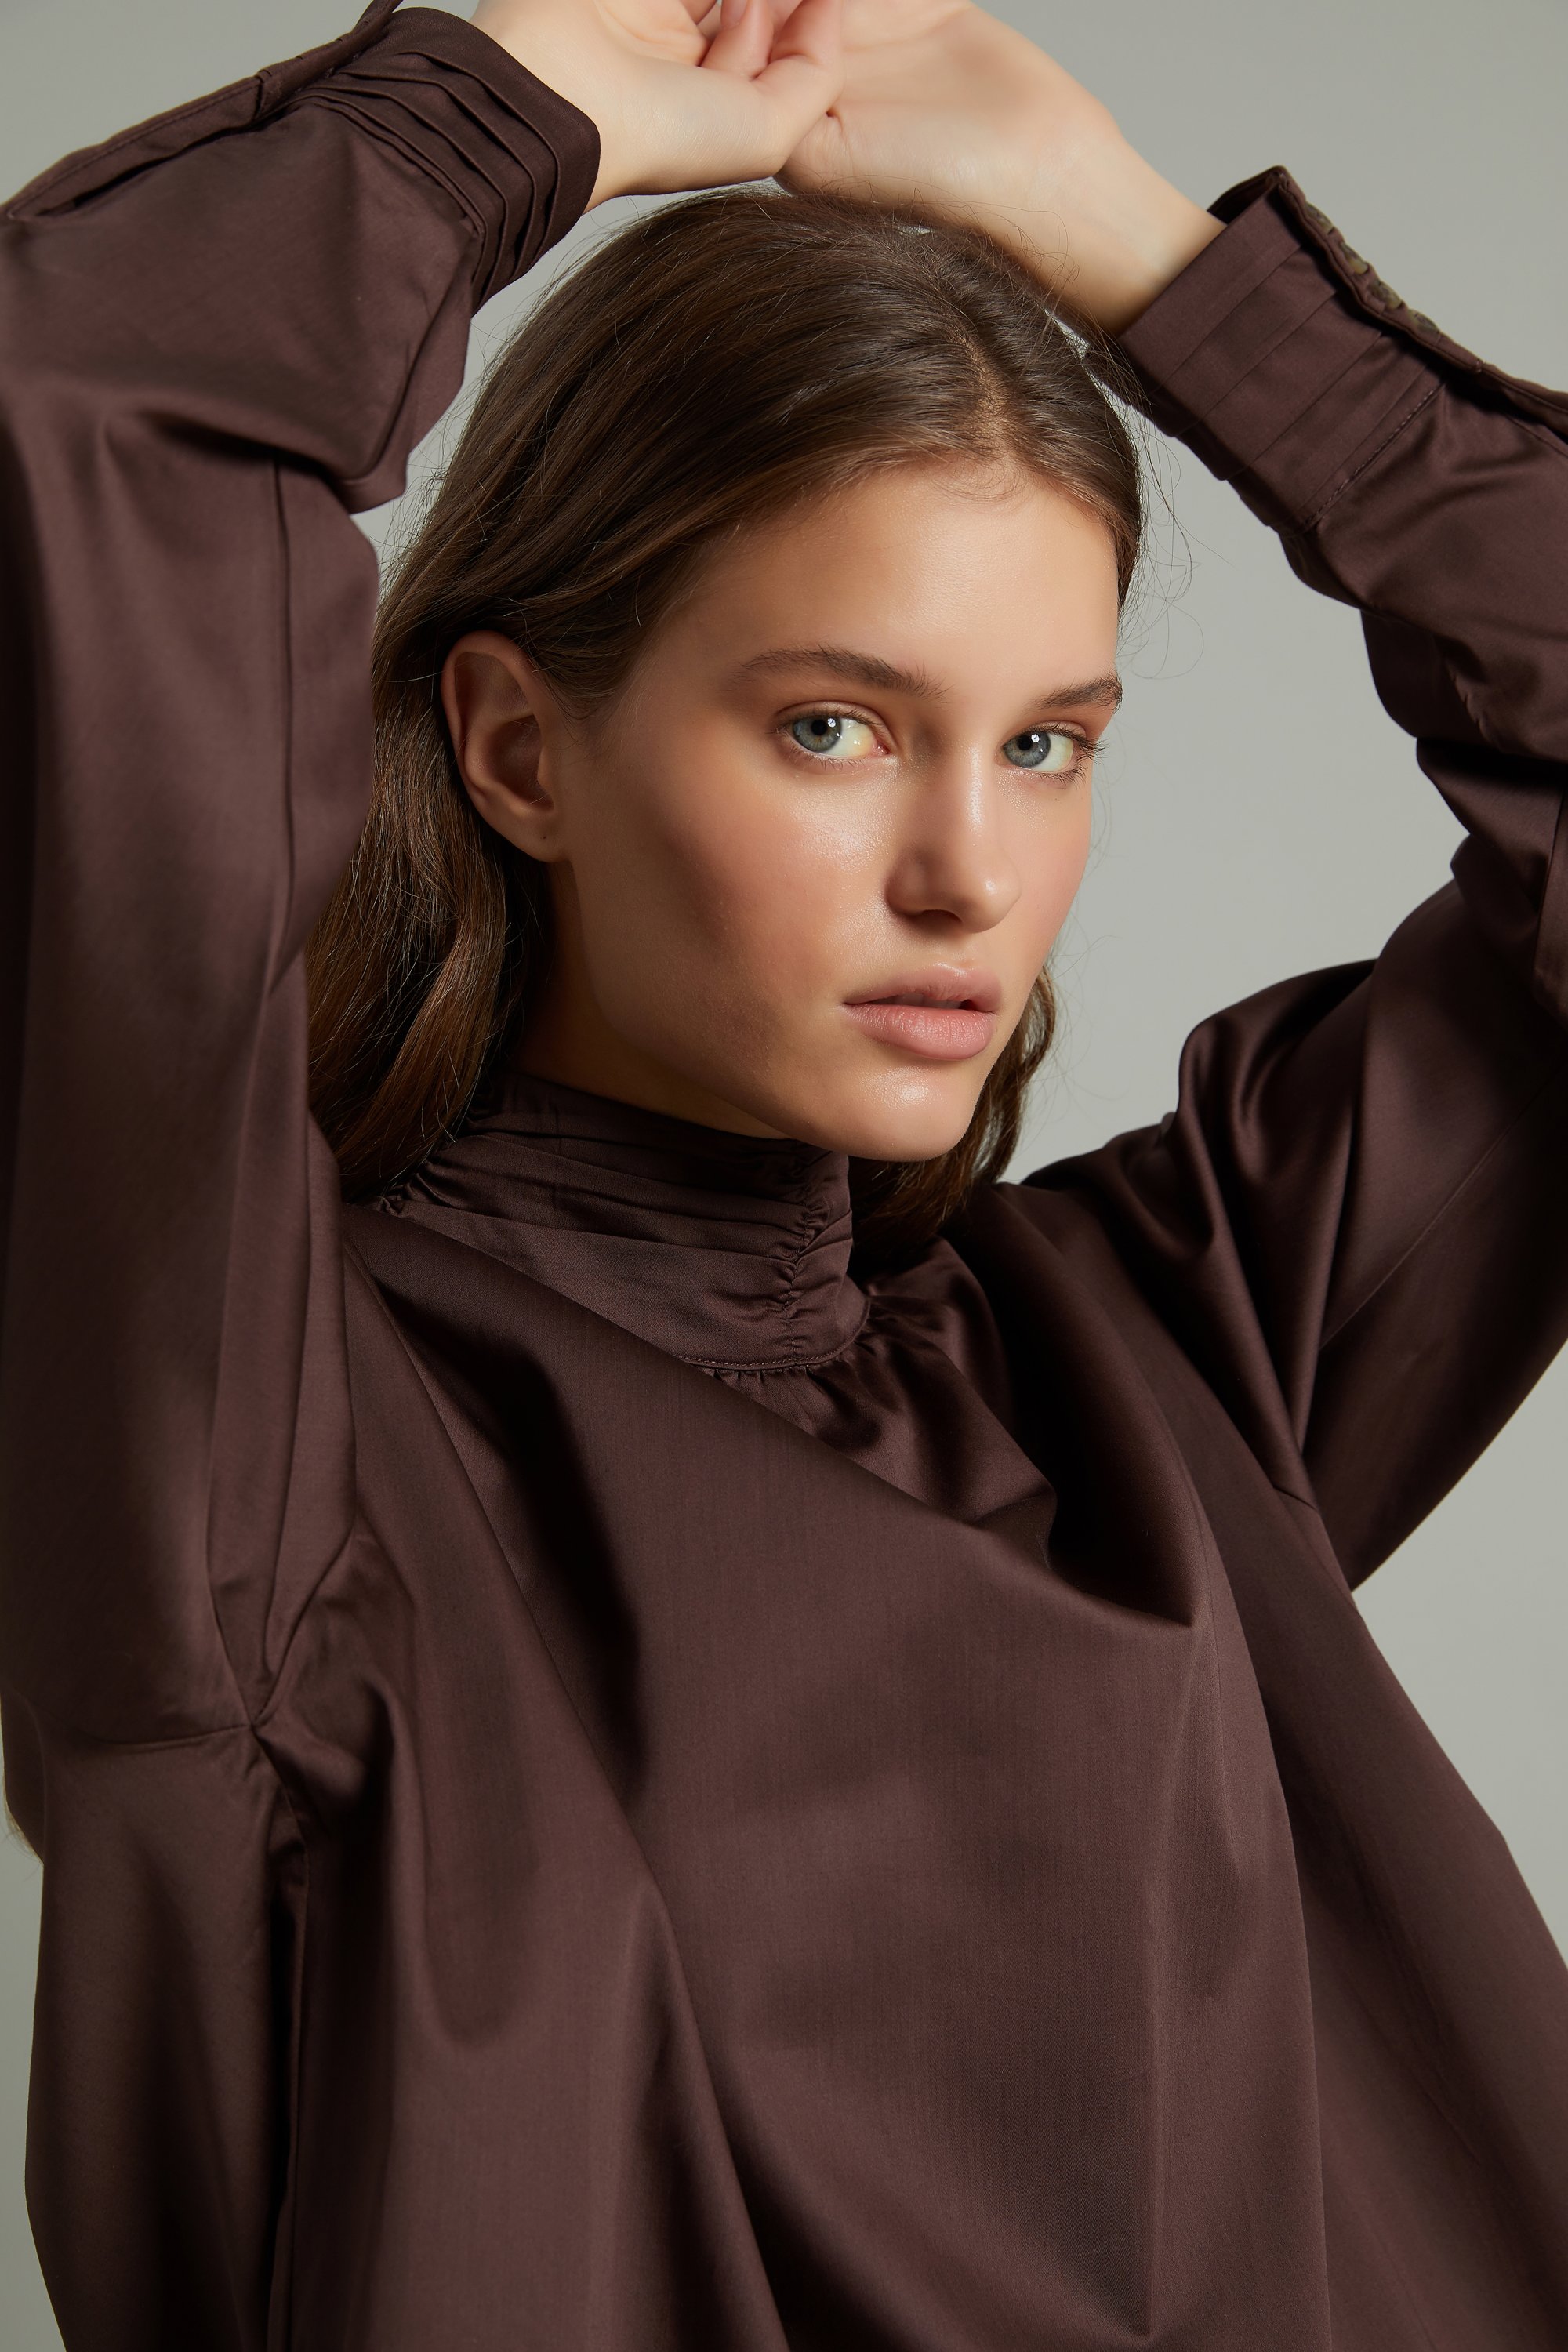 The Salome blouse inspired by the Russian psychoanalyst. (Photo courtesy of Harmonious)